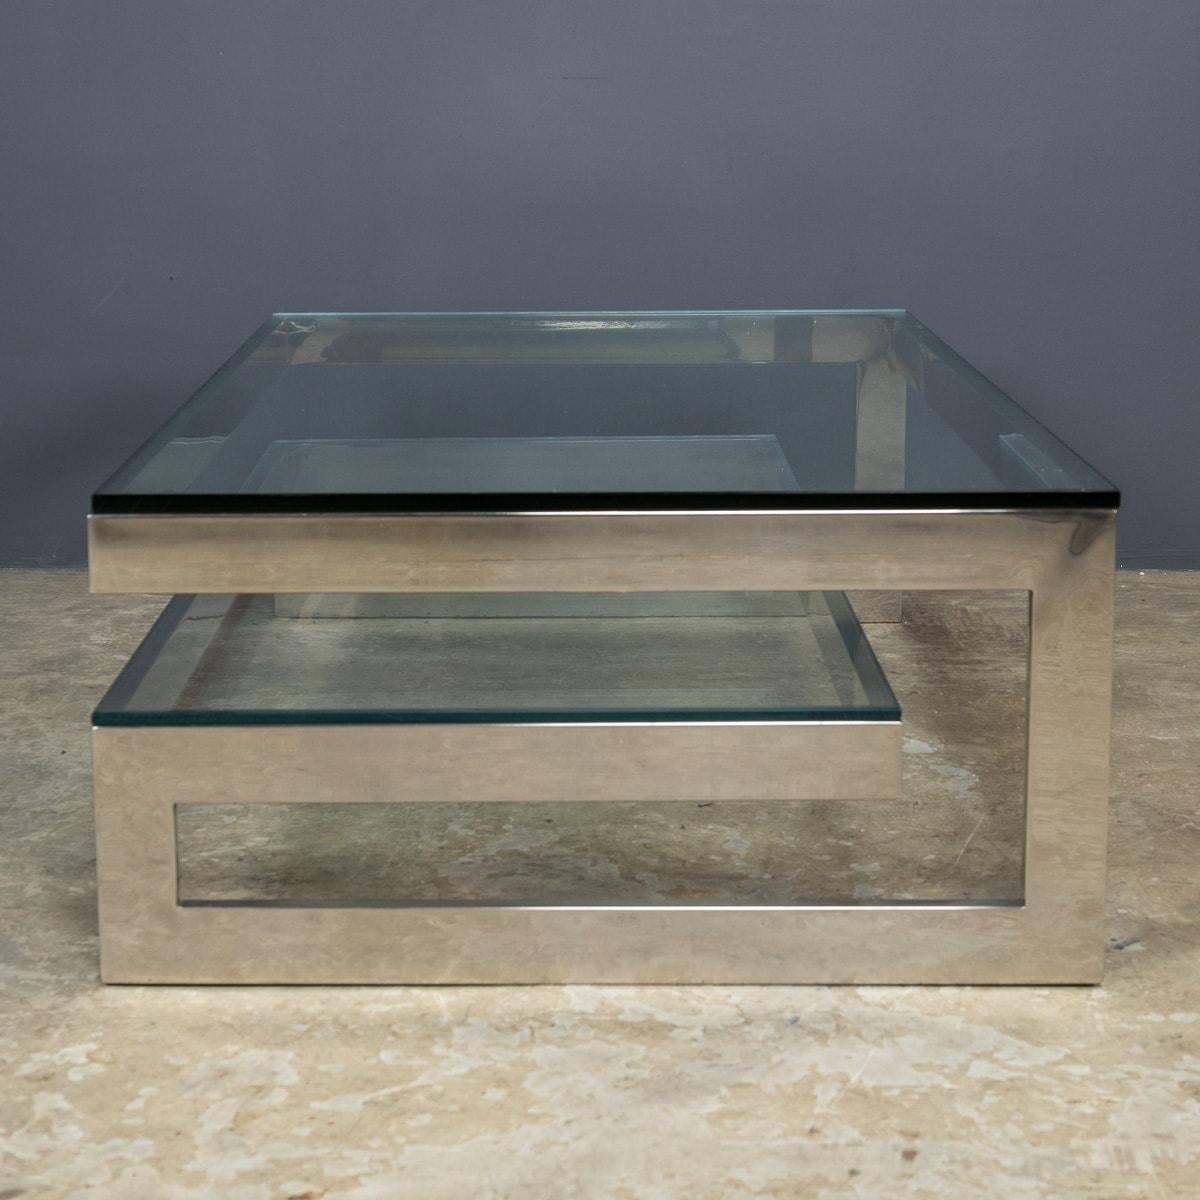 Belgian 20th Century Polished Metal & Glass Coffee Table By Belgo Chrome, Belgium c.1970 For Sale